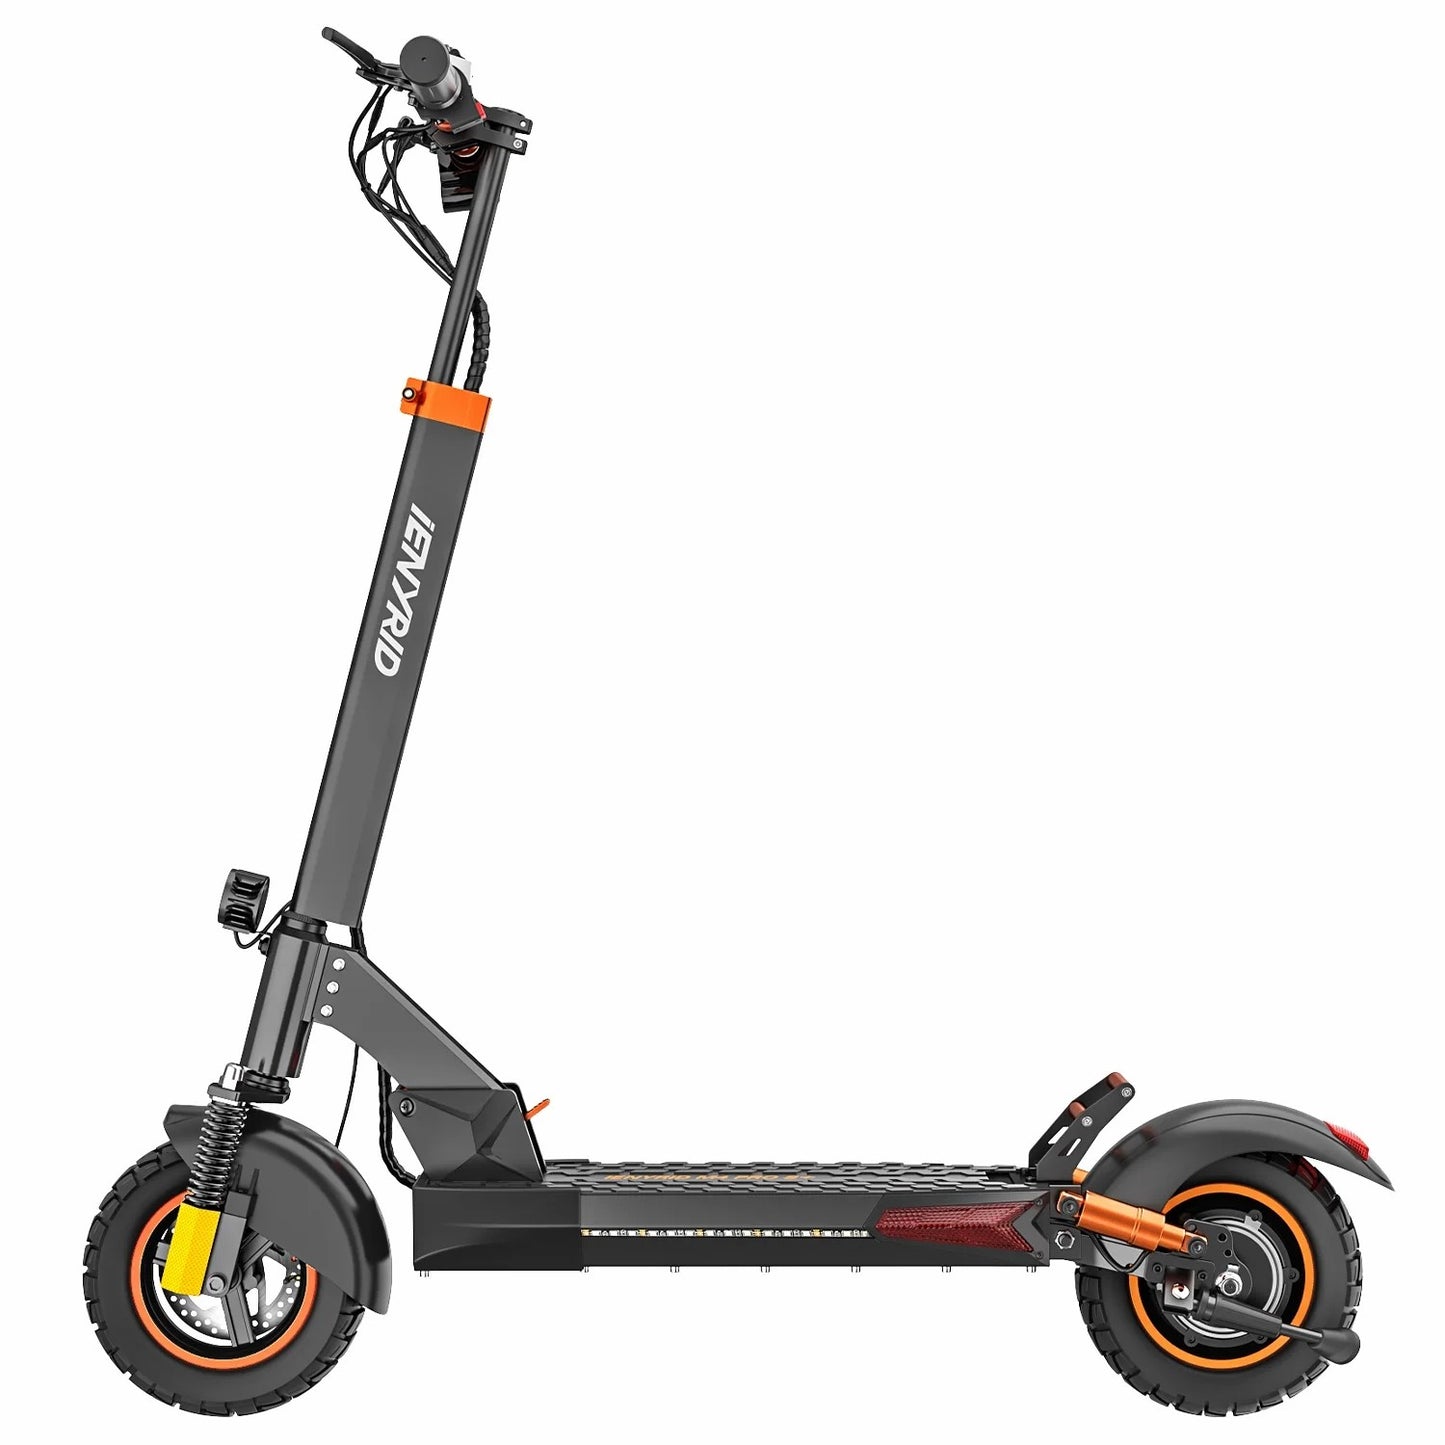 Complete side view of the Ienyrid M4 Pro scooter with detailed design features.